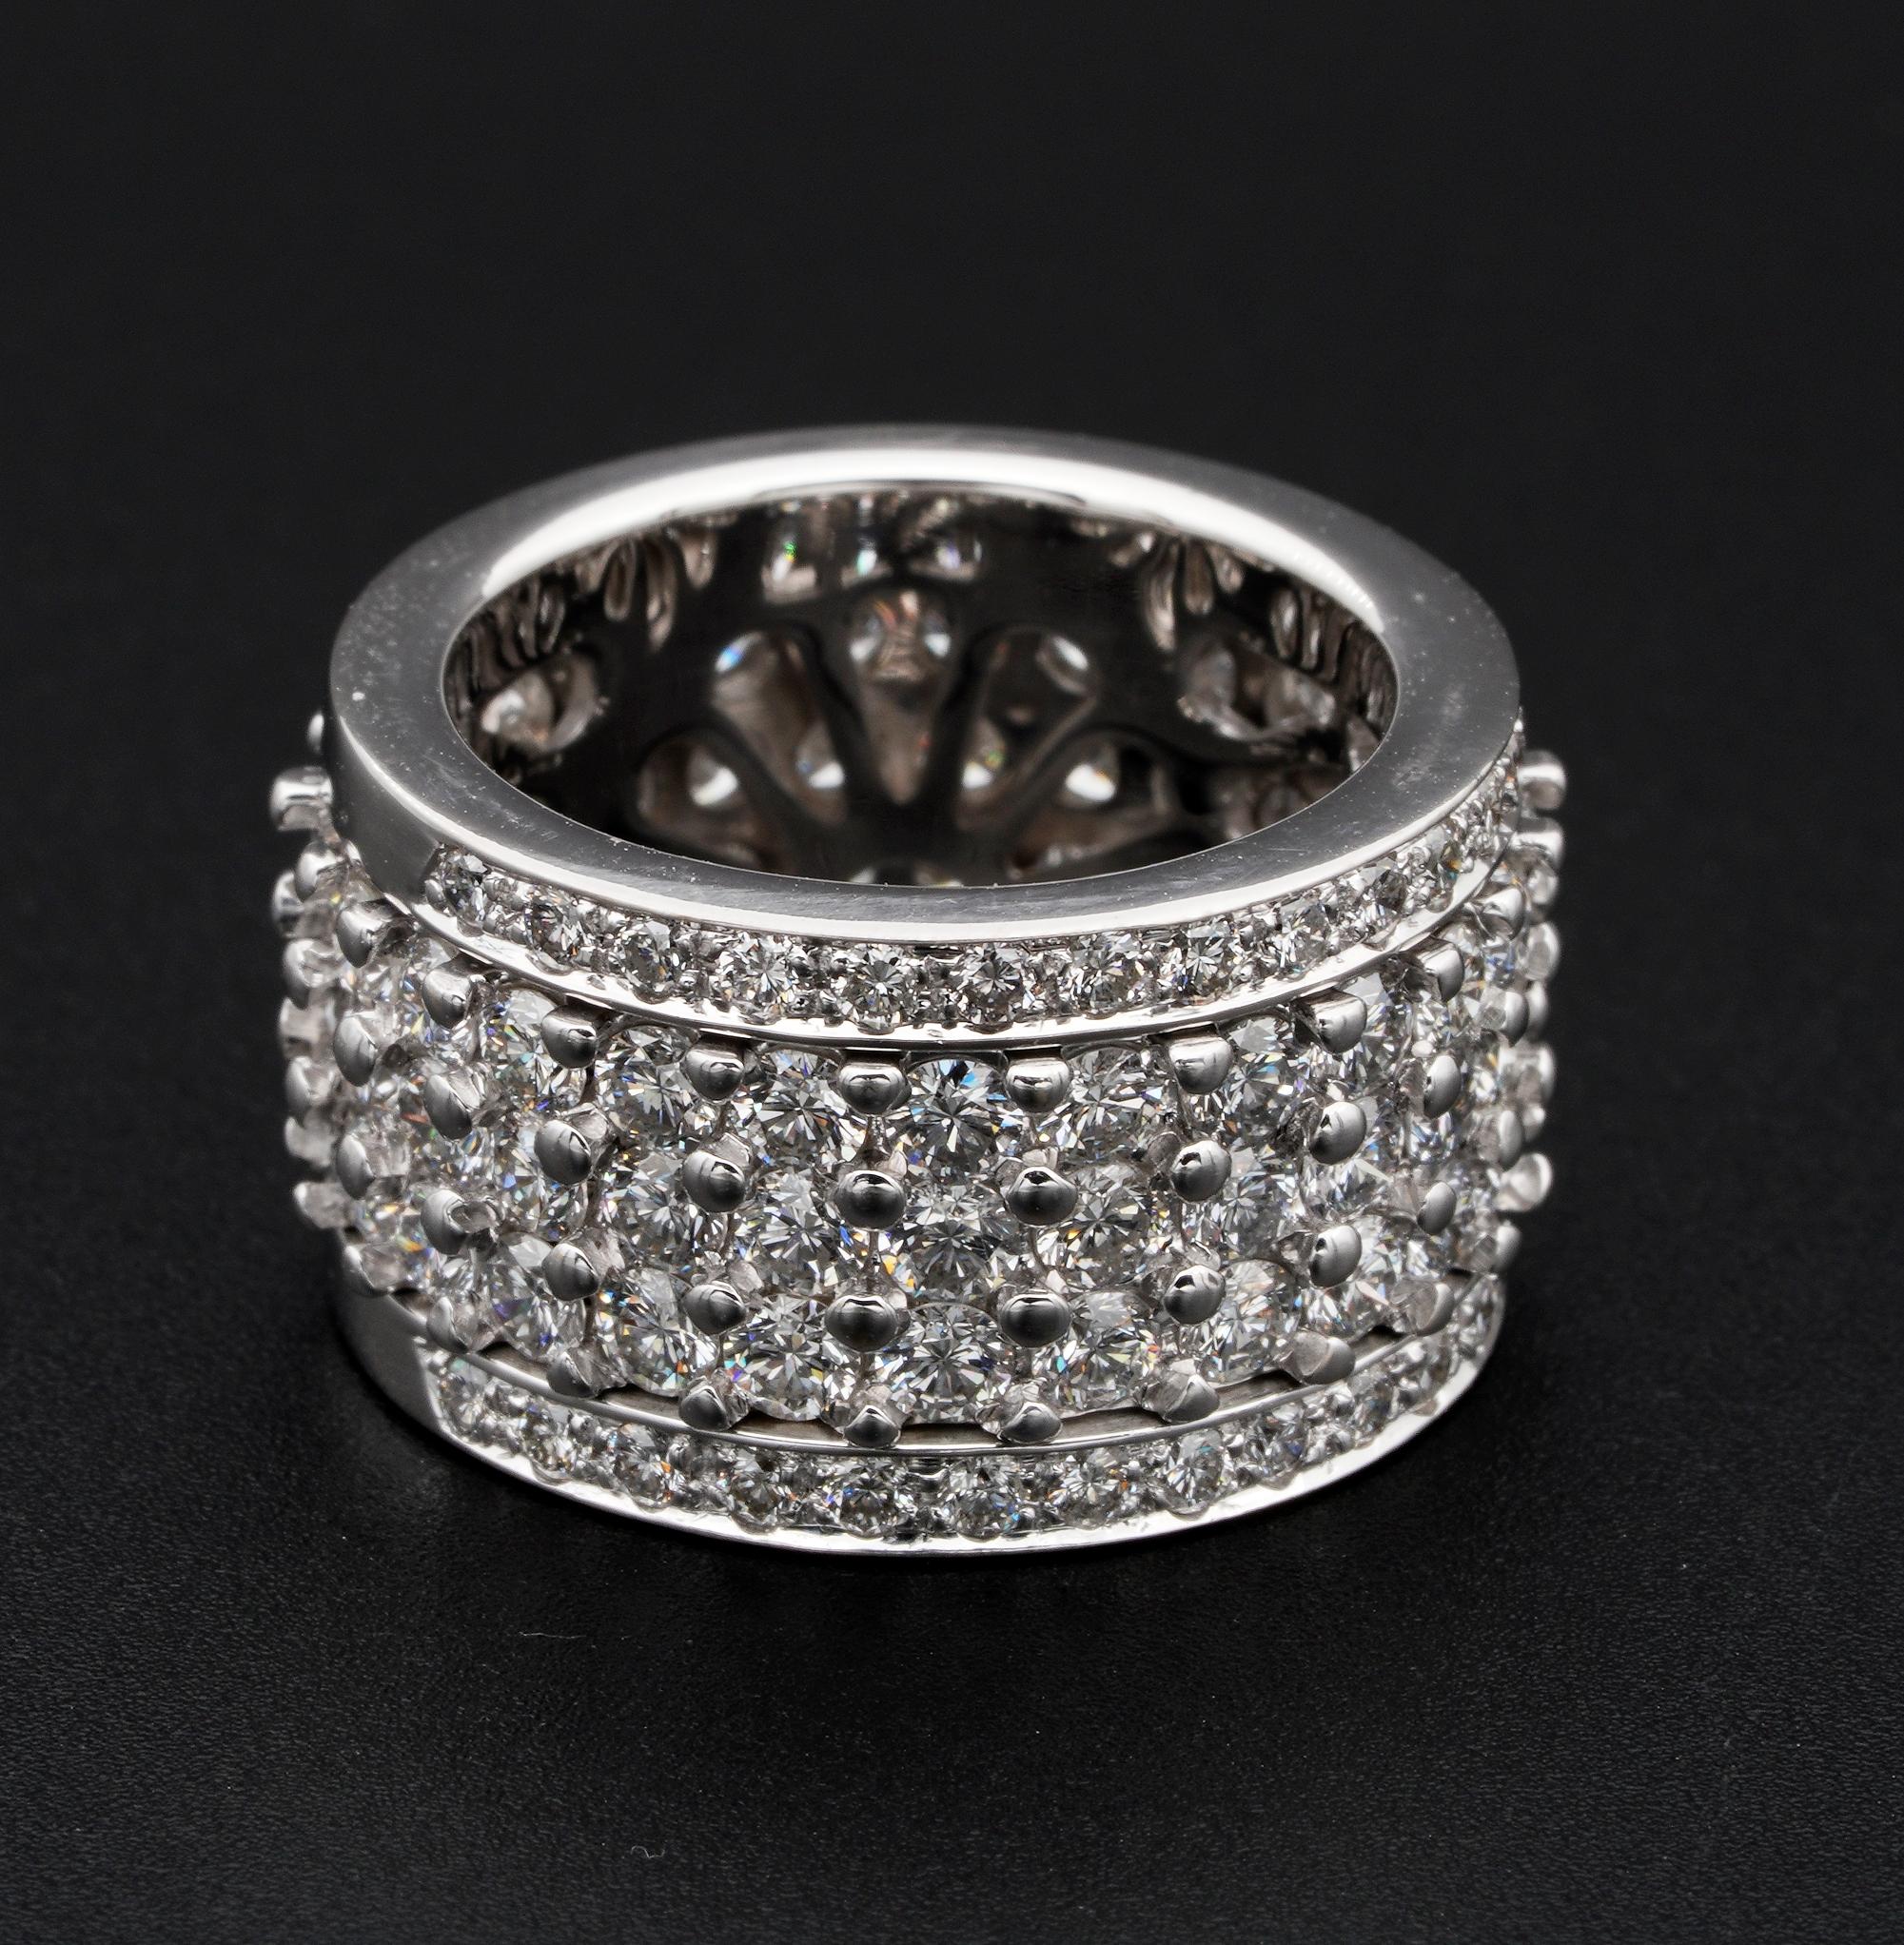 Luxury Eternity Ring
An Impressive, high end of the highest level, spin or rotating Diamond Eternity ring in Night or Day version
Superbly hand crafted as unique piece of jewellery , over cared at slightest detail, substantial weight of 18 KT white